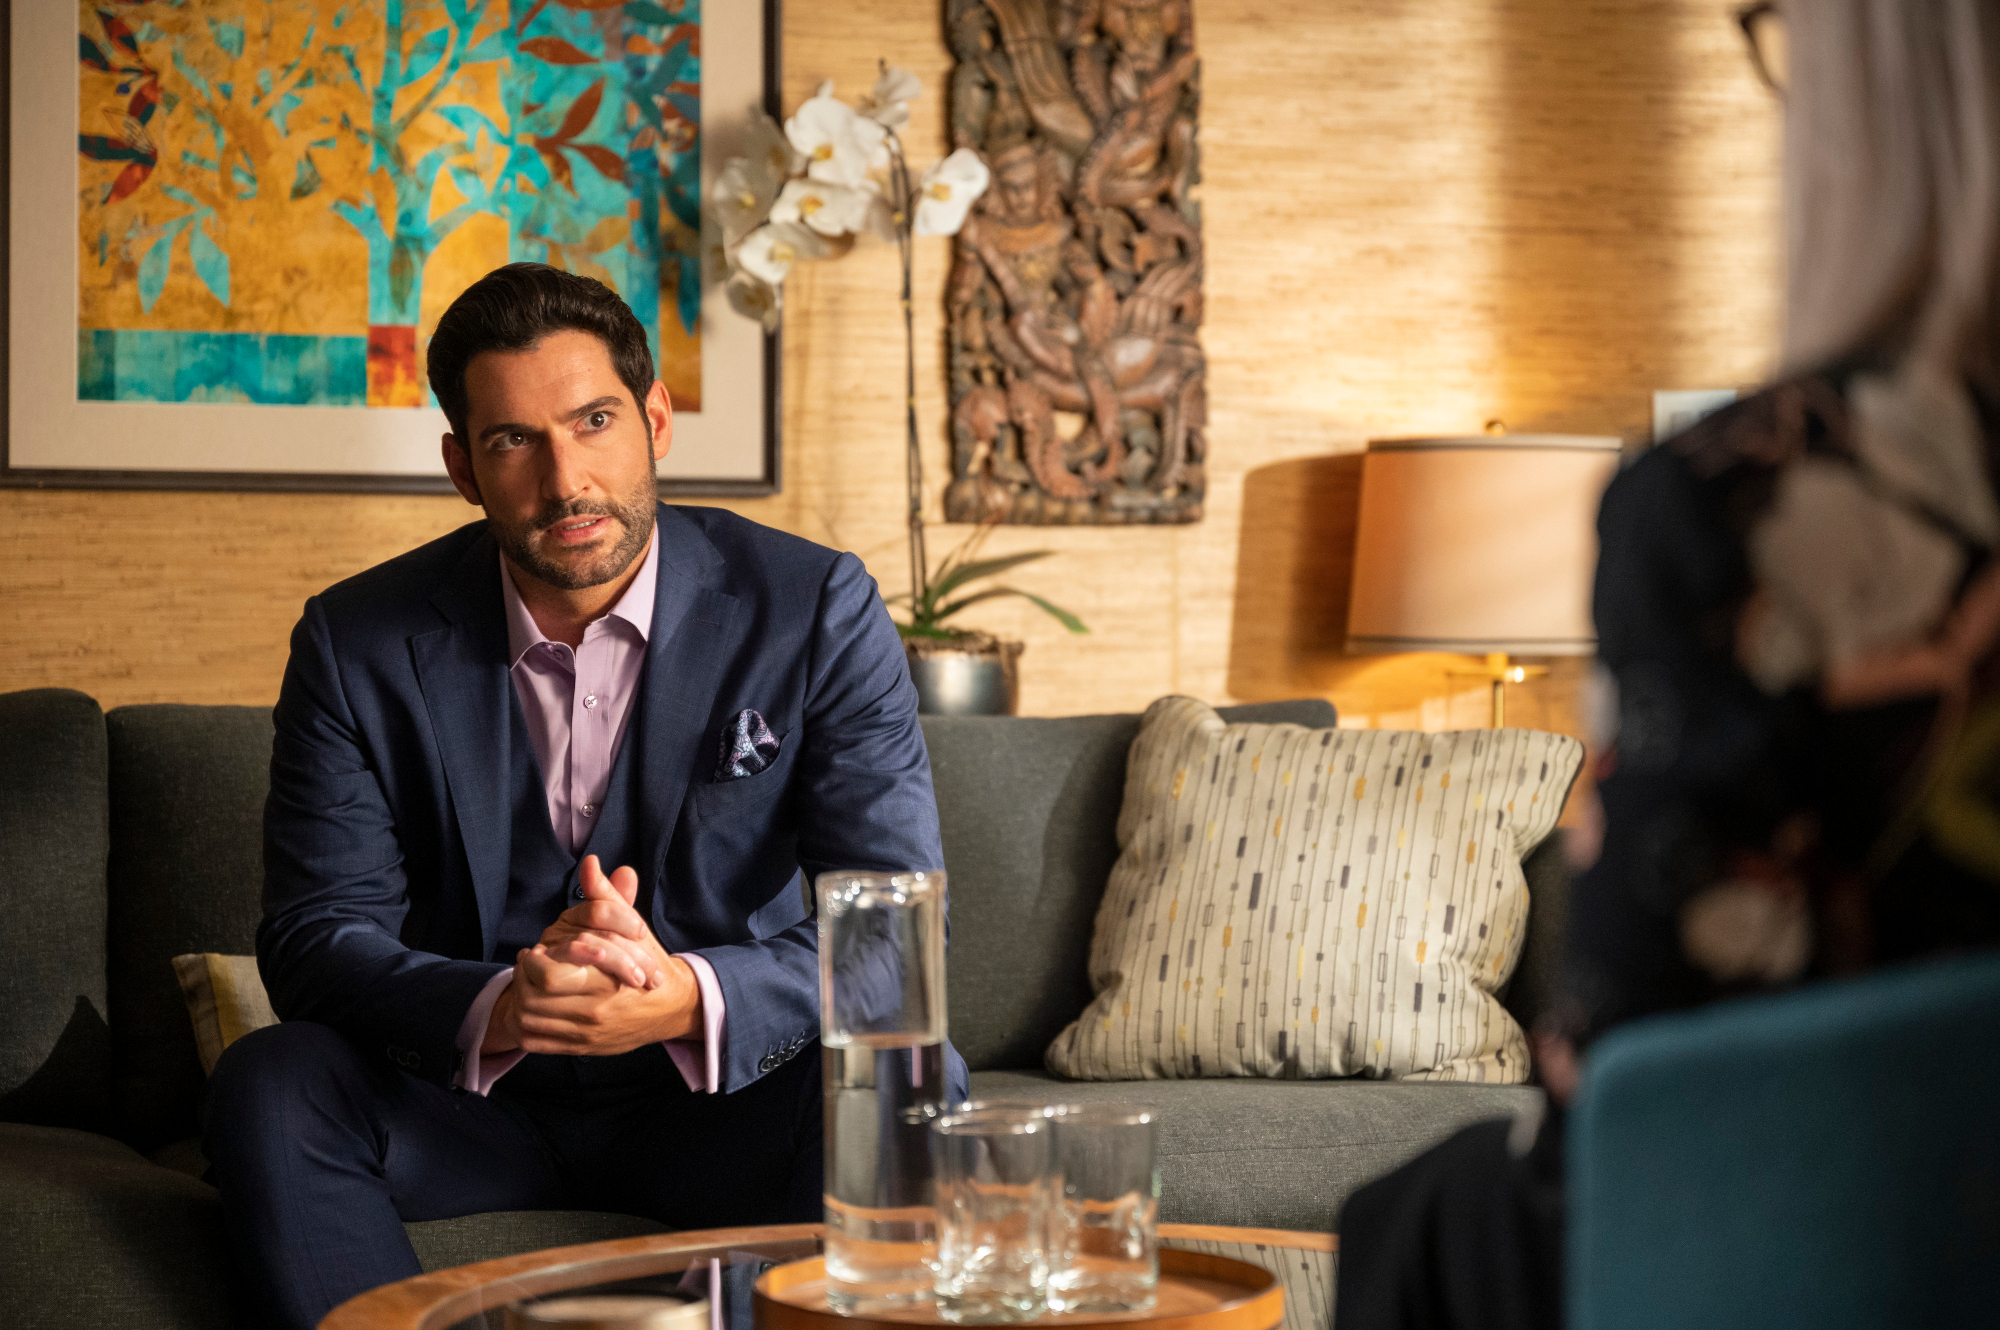 Tom Ellis as Lucifer Morningstar in 'Lucifer' Season 6. He's sitting on Linda's couch and venting.